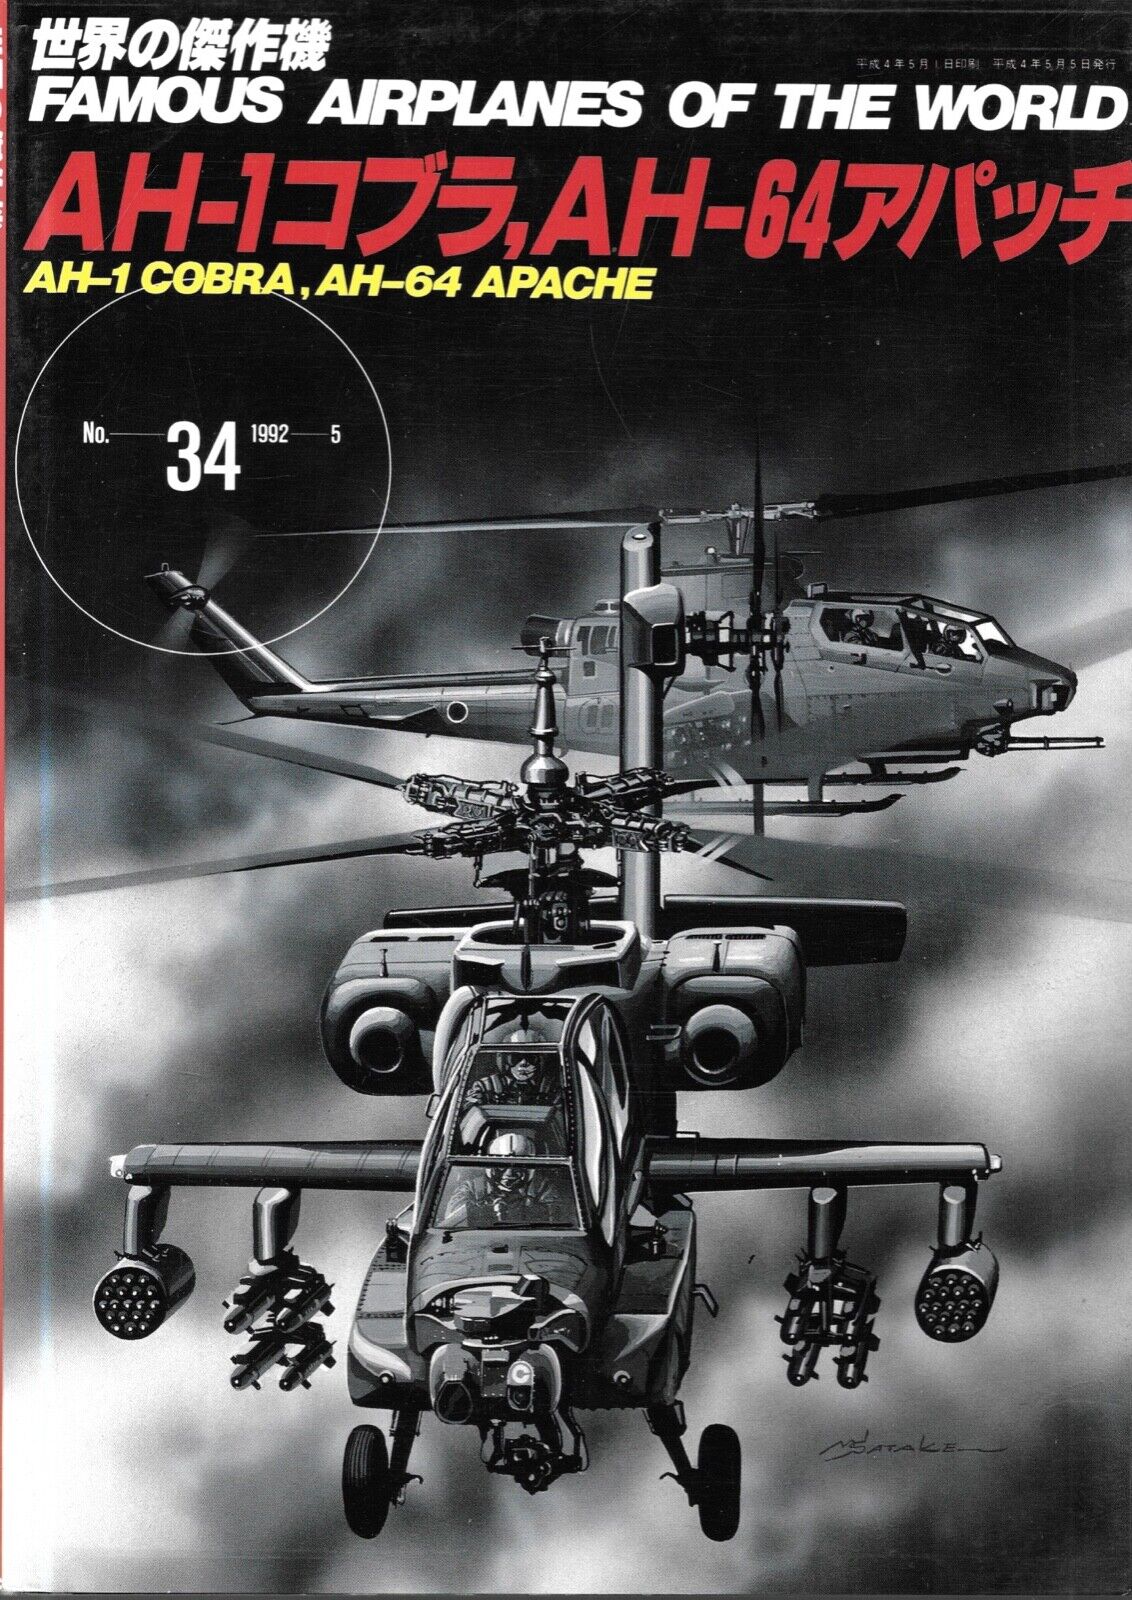 FAOW Famous Airplanes Of The World No.34 AH-1 Cobra AH-64 Apache Helicopter